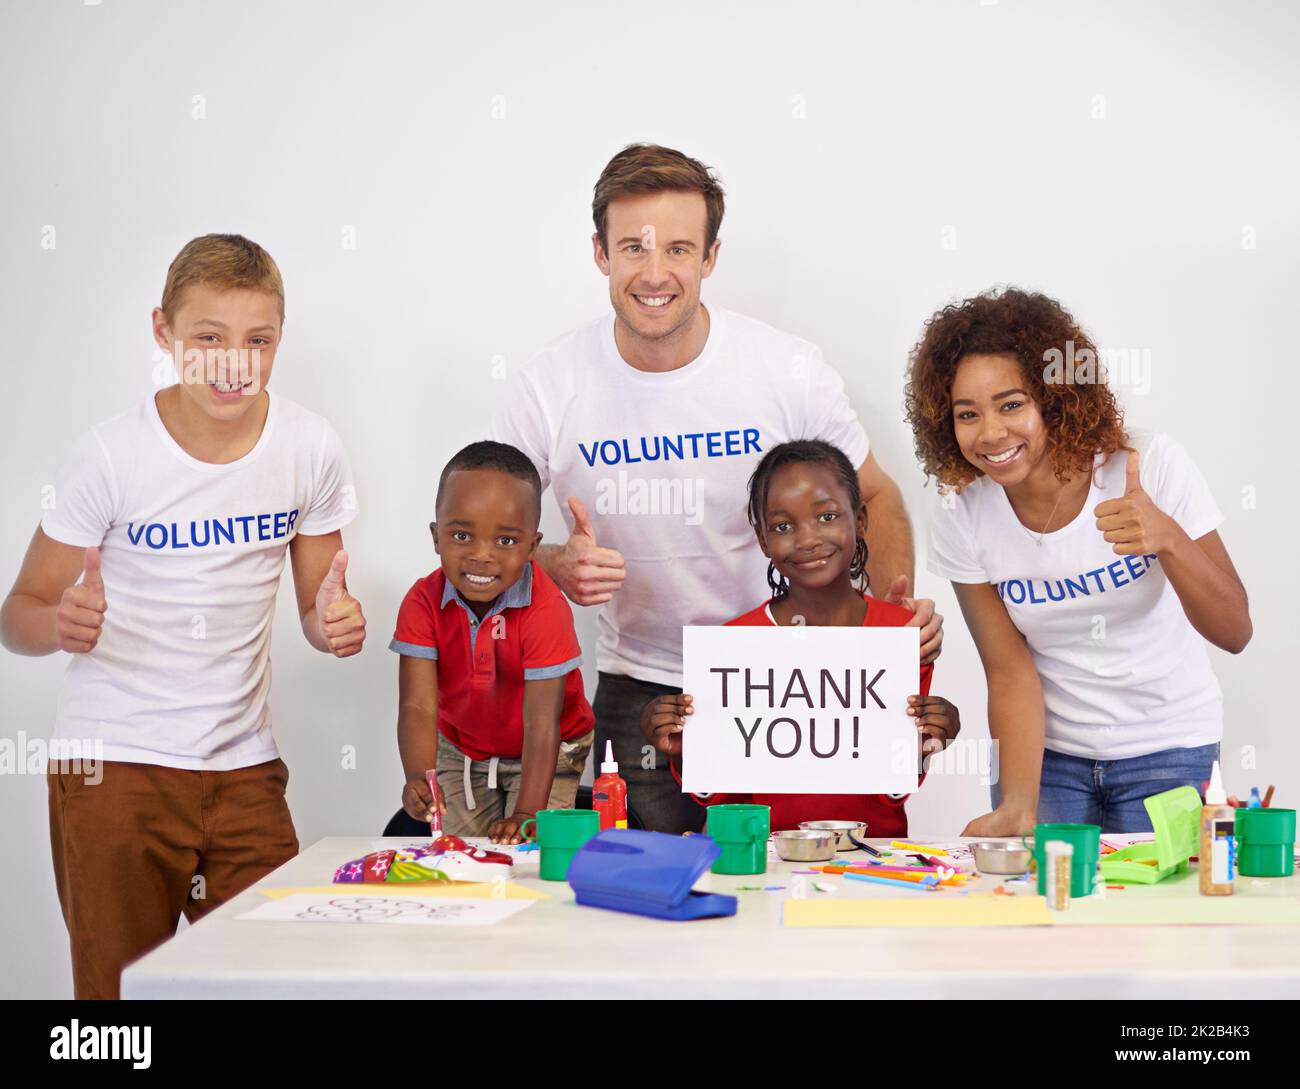 Every child needs someone to look up to. Portrait of a volunteer holding up a thank you sign while working with little children. Stock Photo